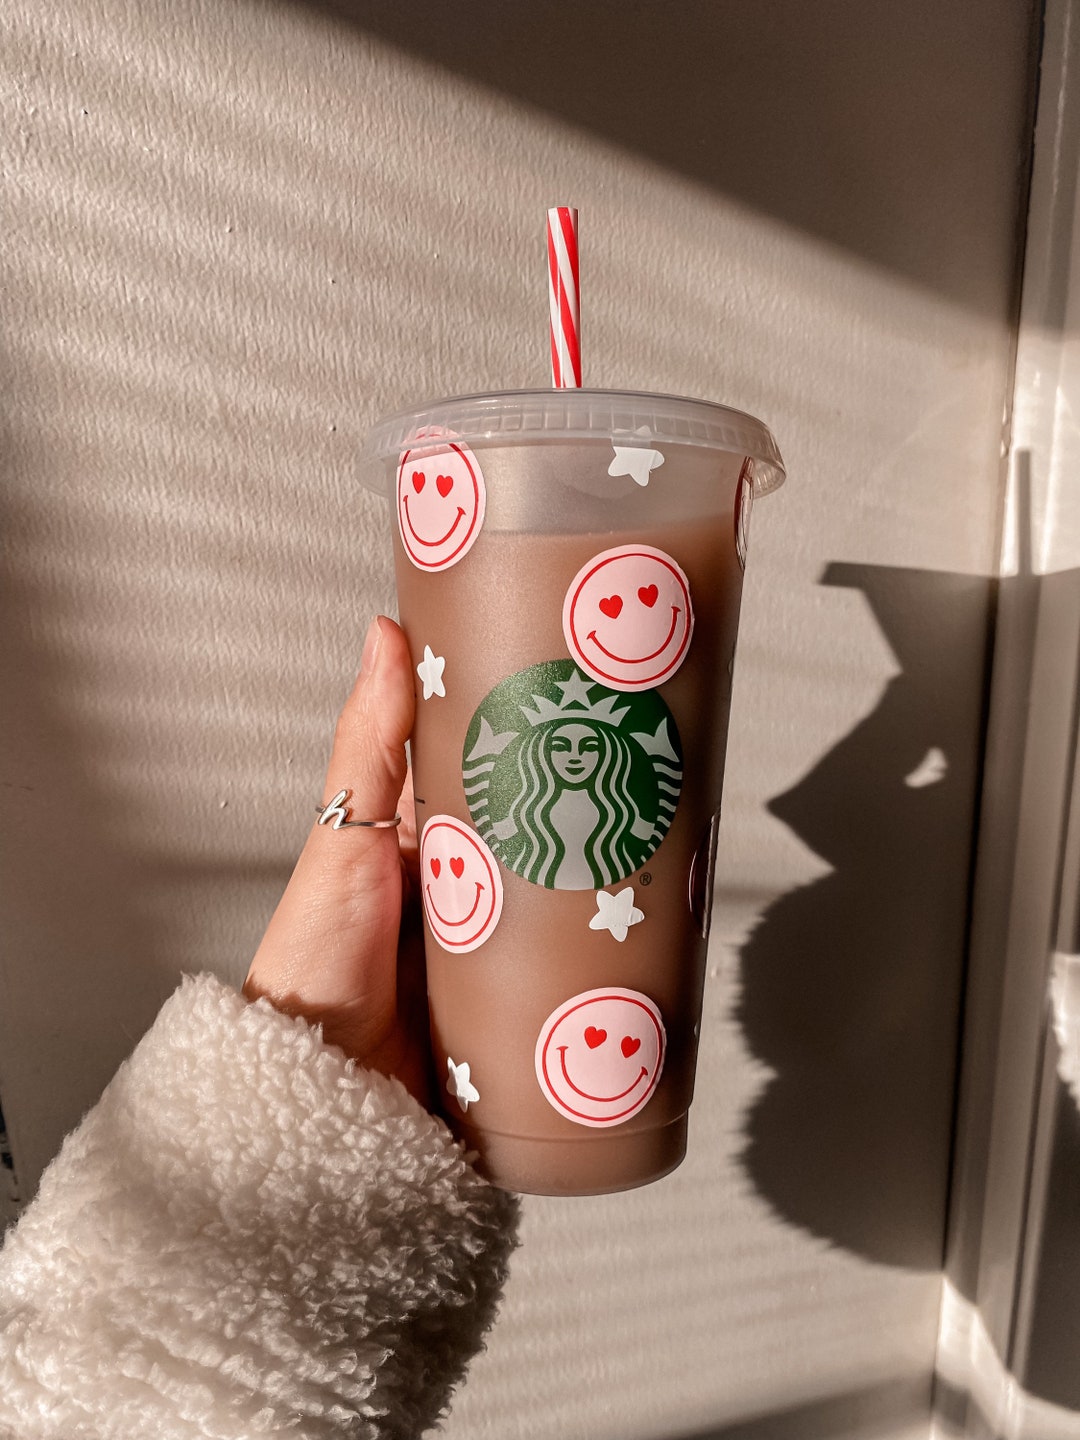 FRIENDS STARBUCKS Cup Personalized Cup FRIENDS Tumbler Friends Gift Cold Cup  Reusable With Lid Aesthetic Cup Friendship Cup Gift 